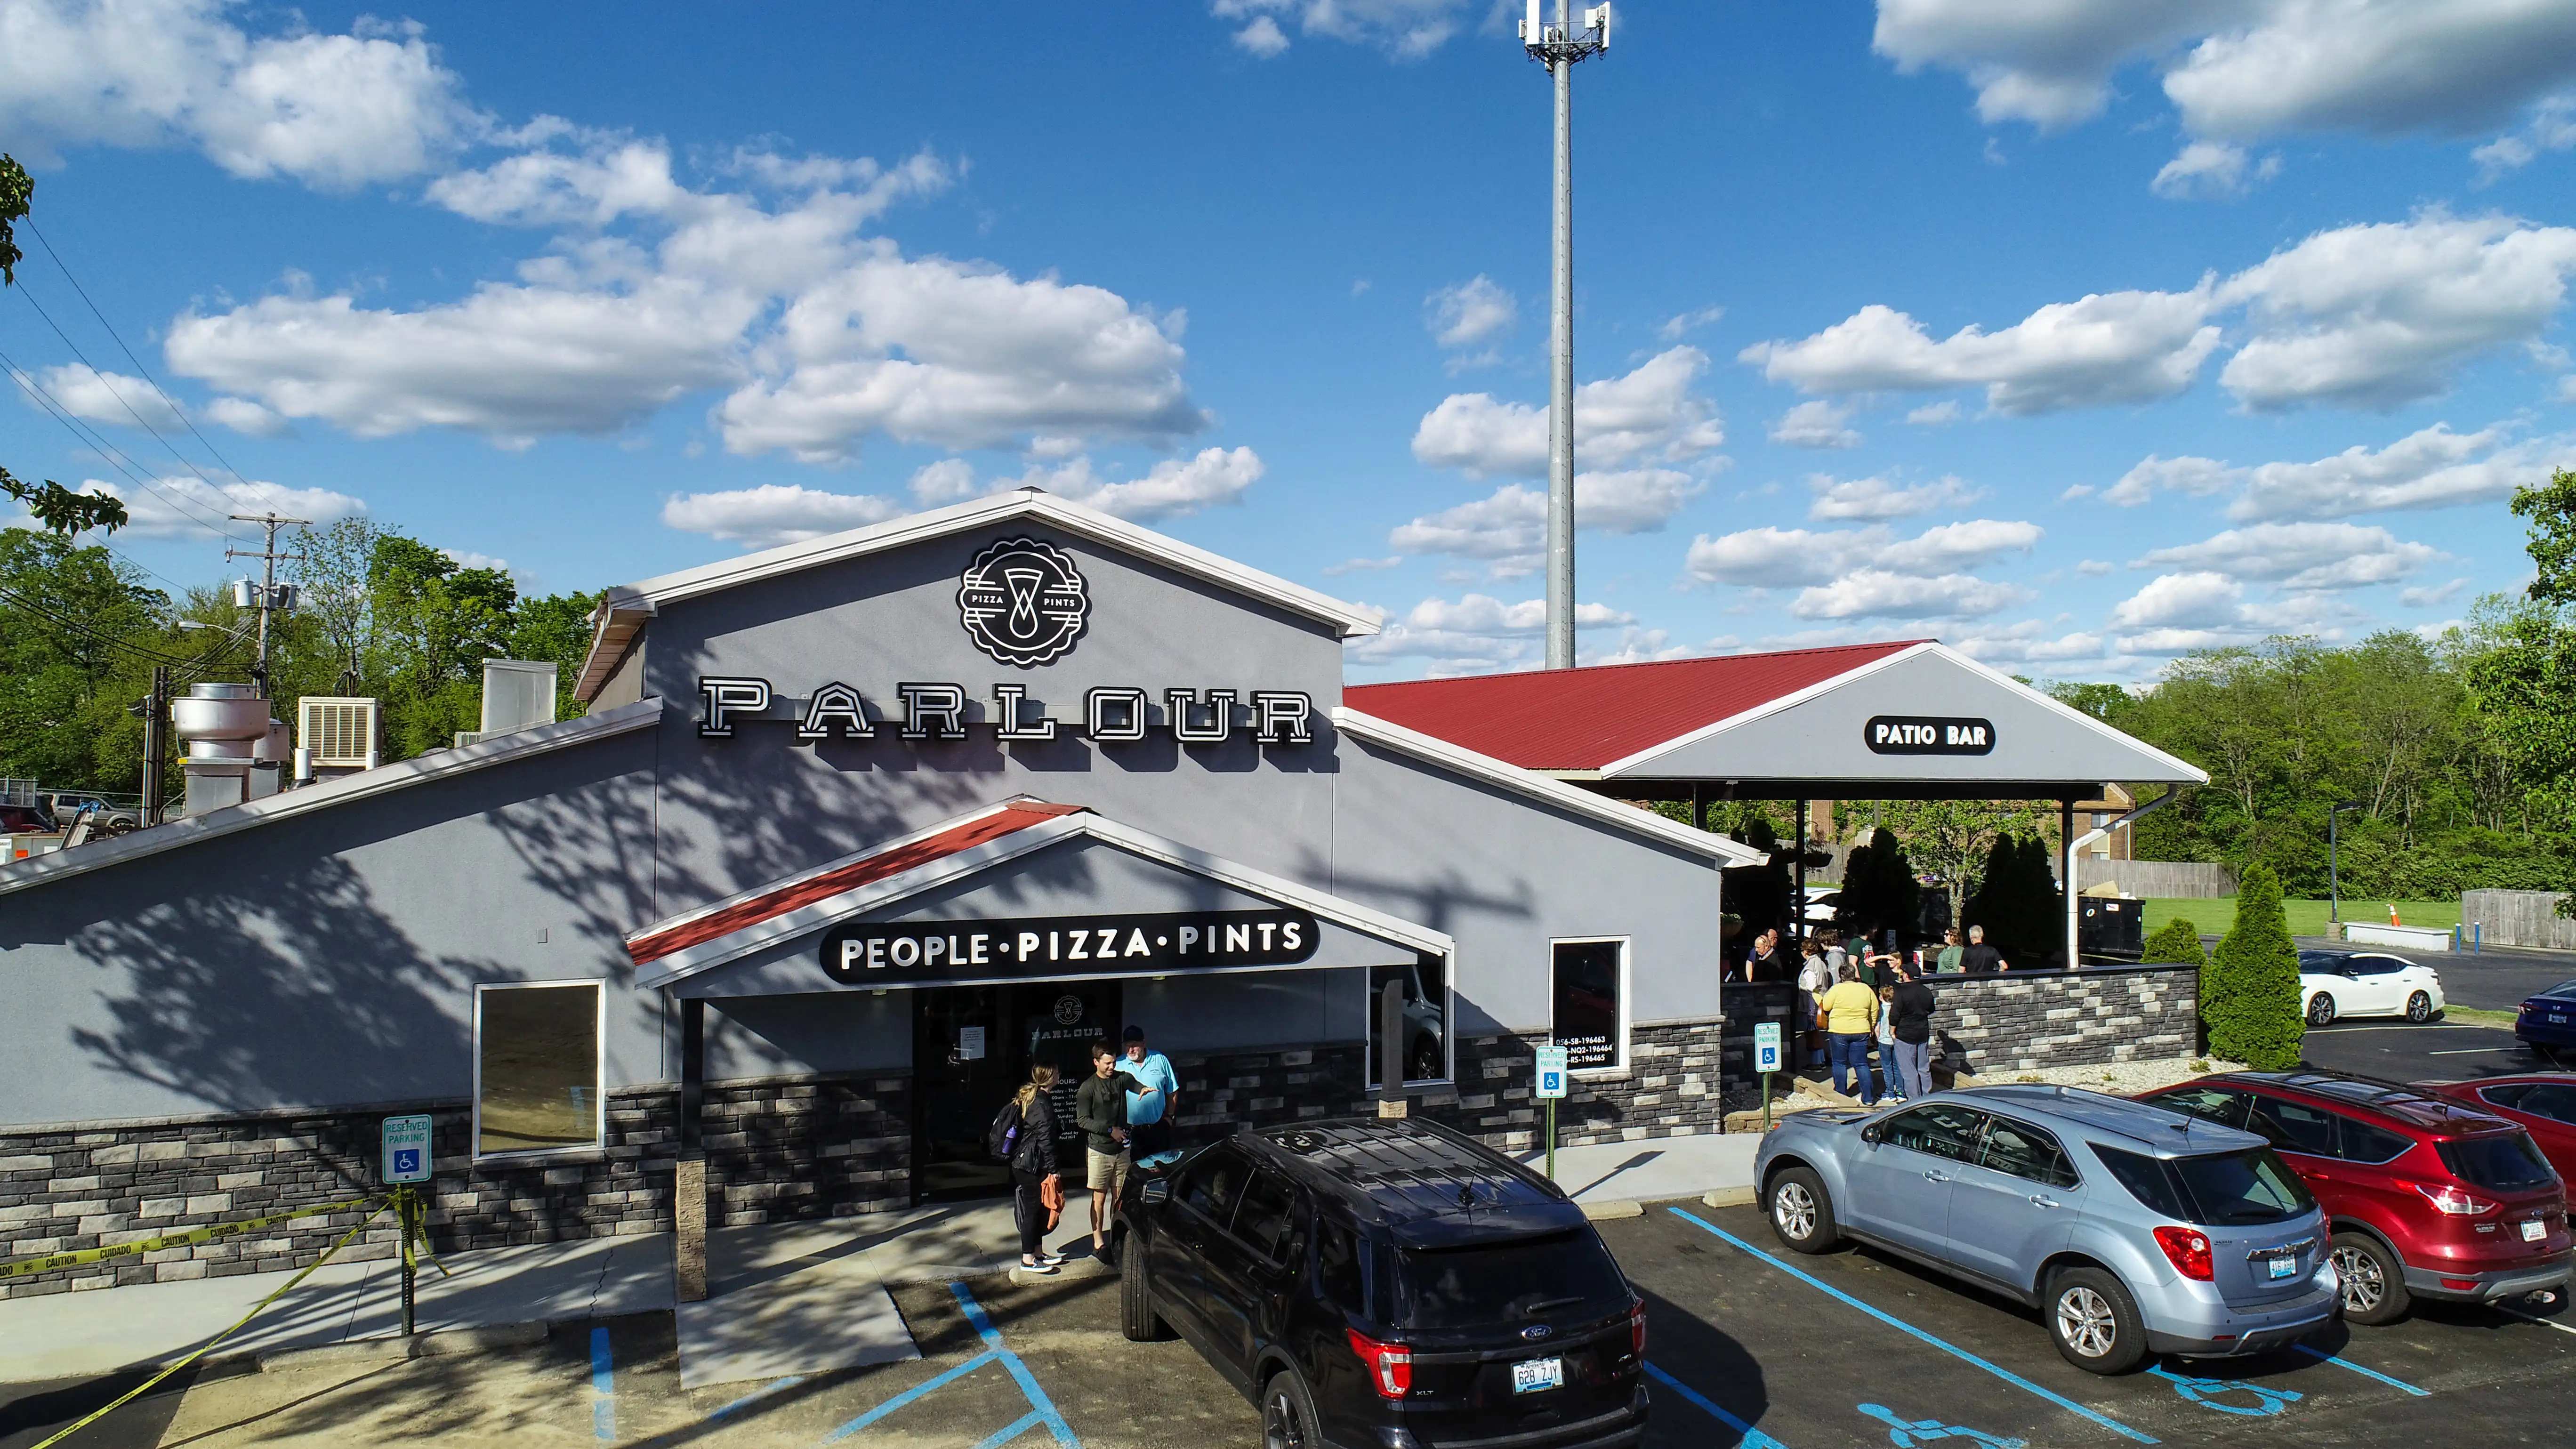 Parlour Pizza and Falls City Beer Join Forces in NuLu